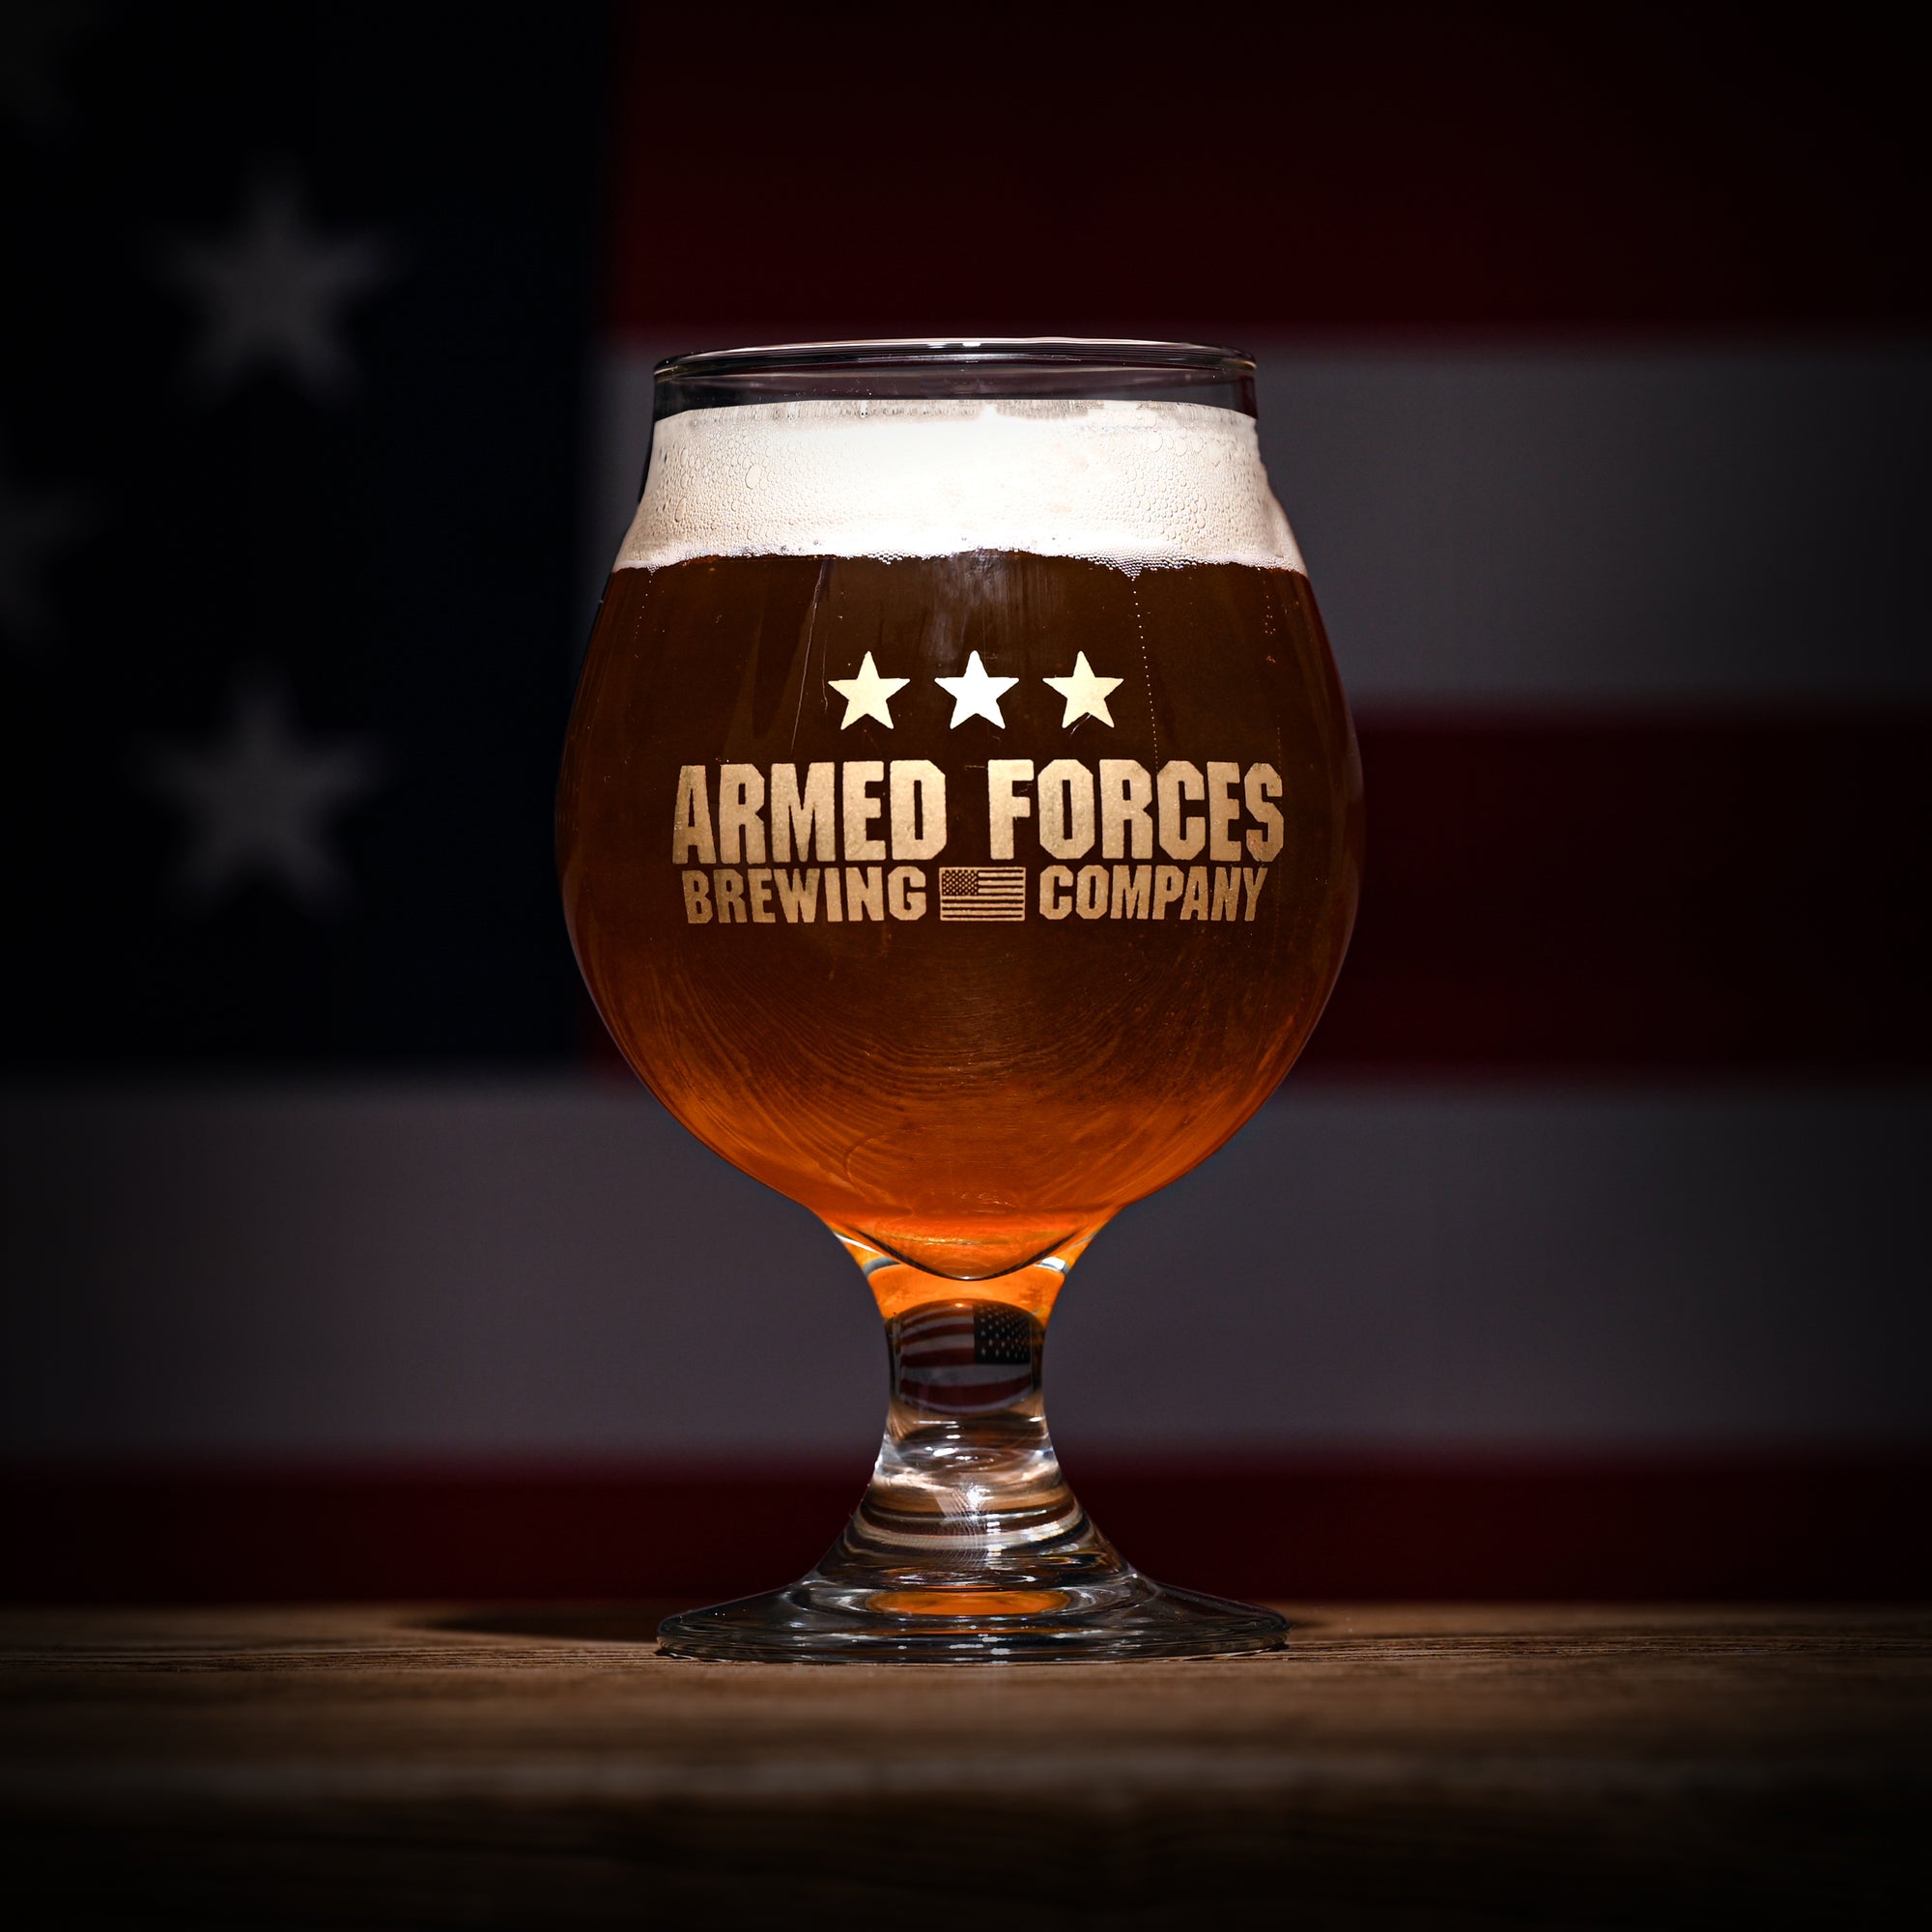 ARMED FORCES BREWING COMPANY 16 OZ BELGIAN BEER GLASS